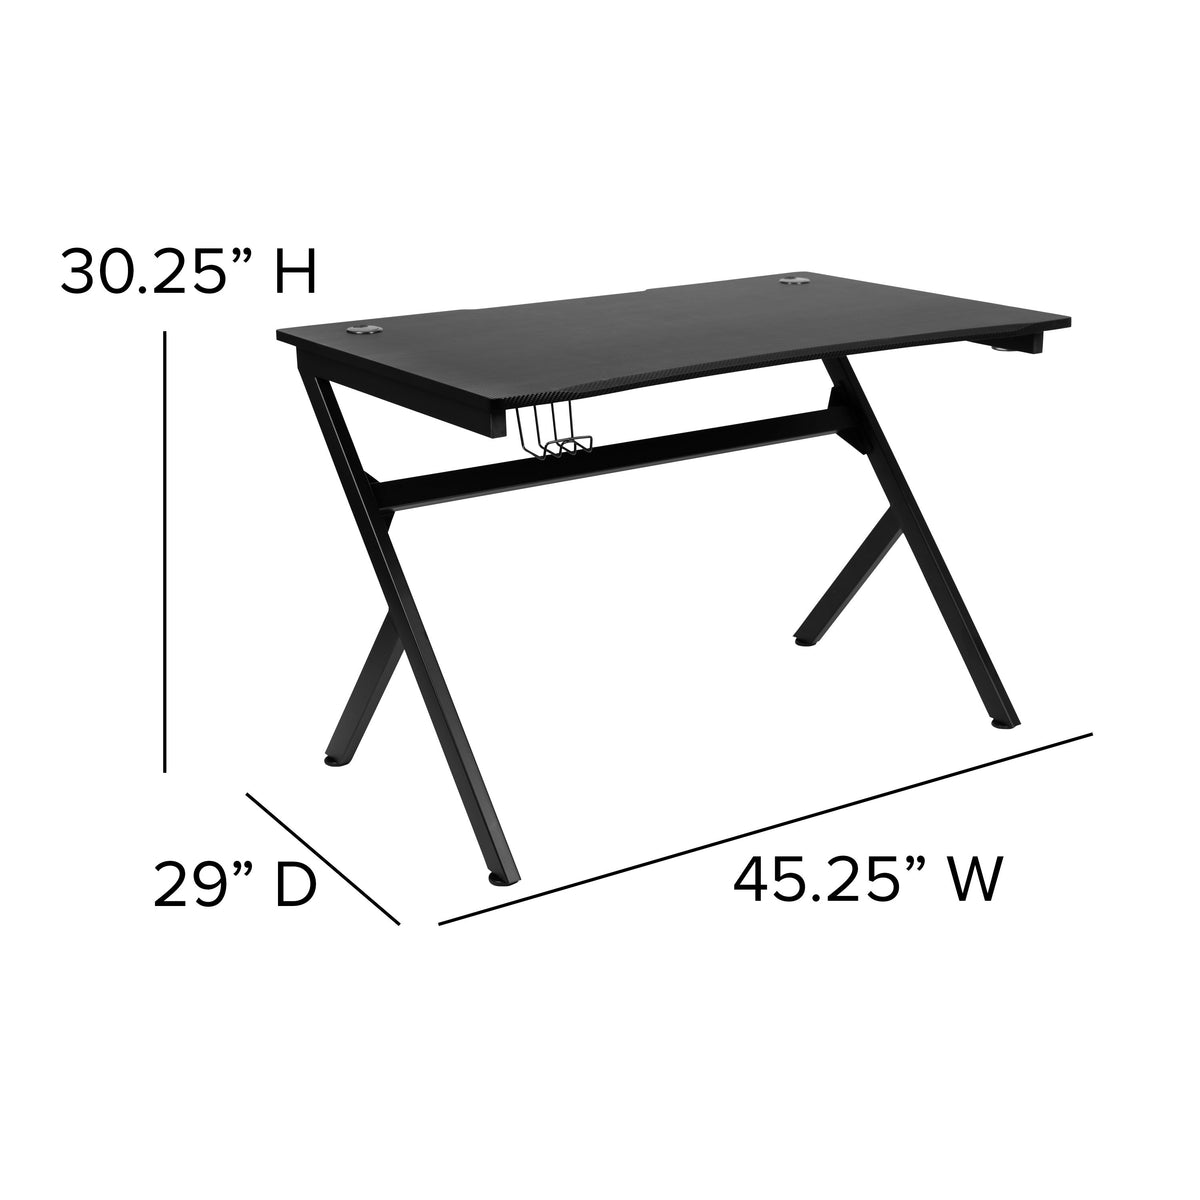 Black Computer Table Gaming Desk - Headphone Holder and 2 Cable Management Holes